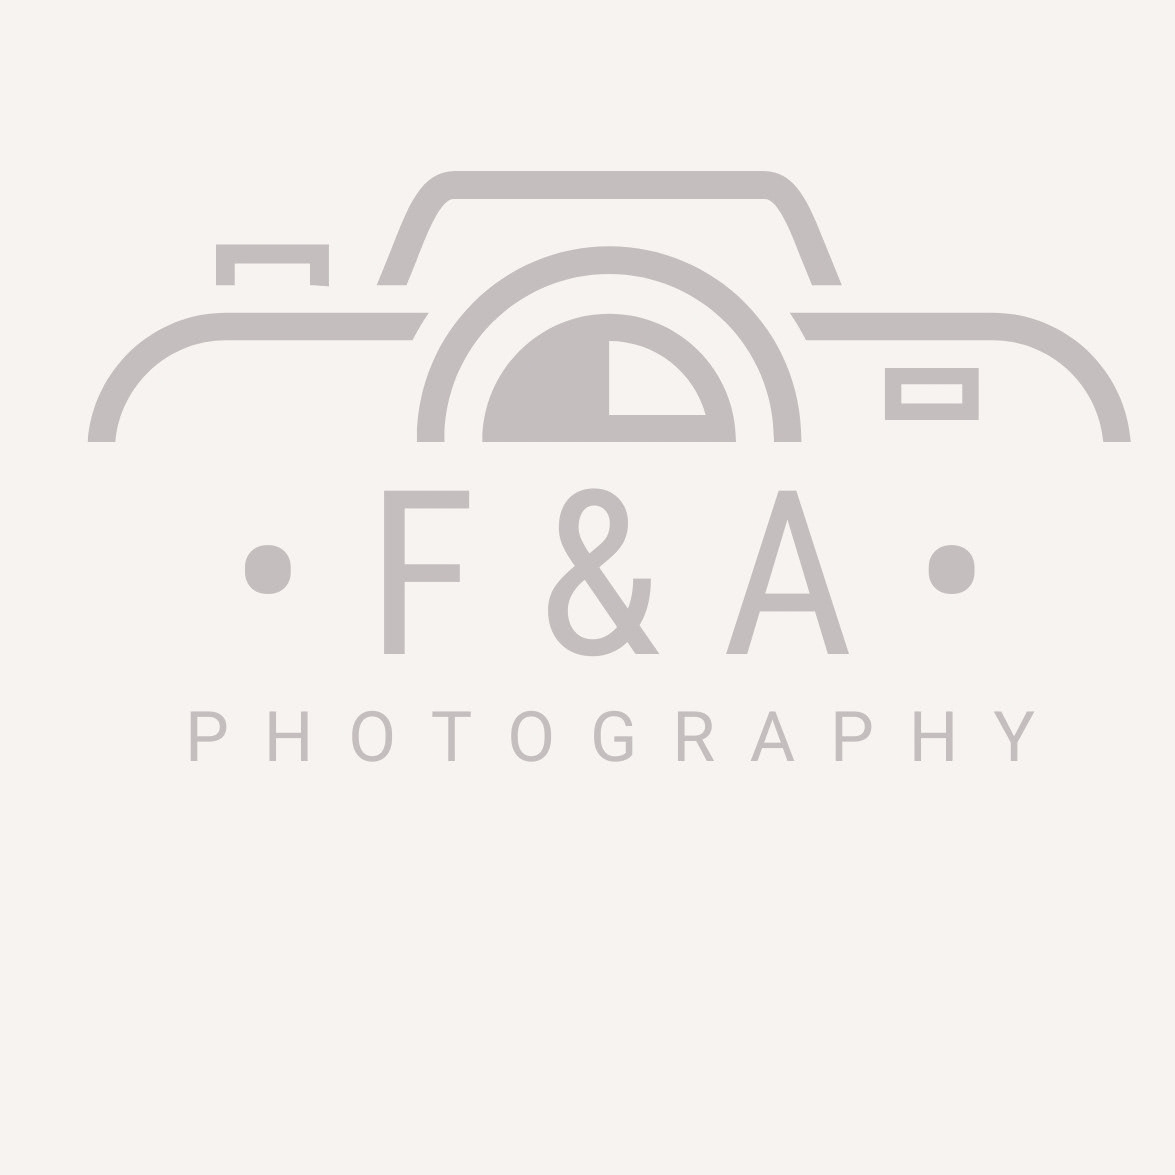 F&A Photography